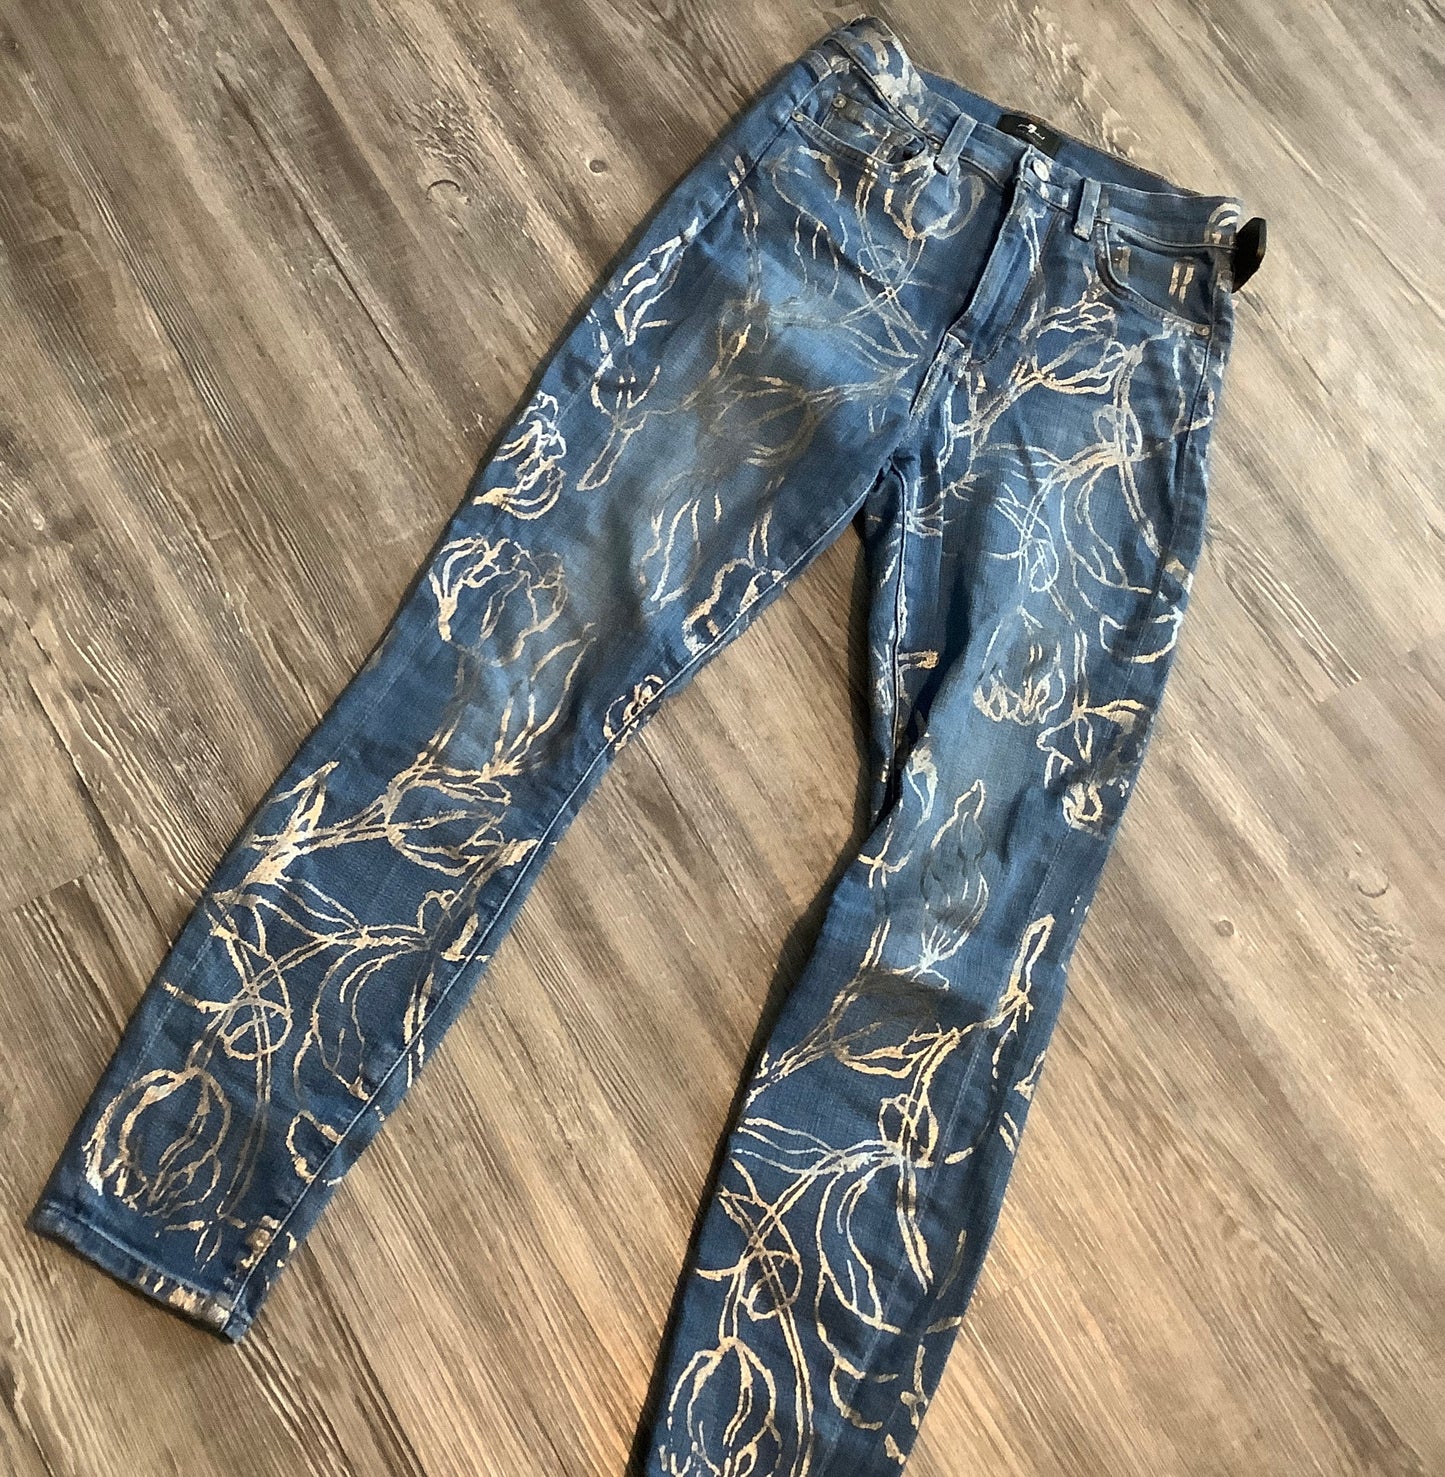 Jeans Skinny By 7 For All Mankind  Size: 2